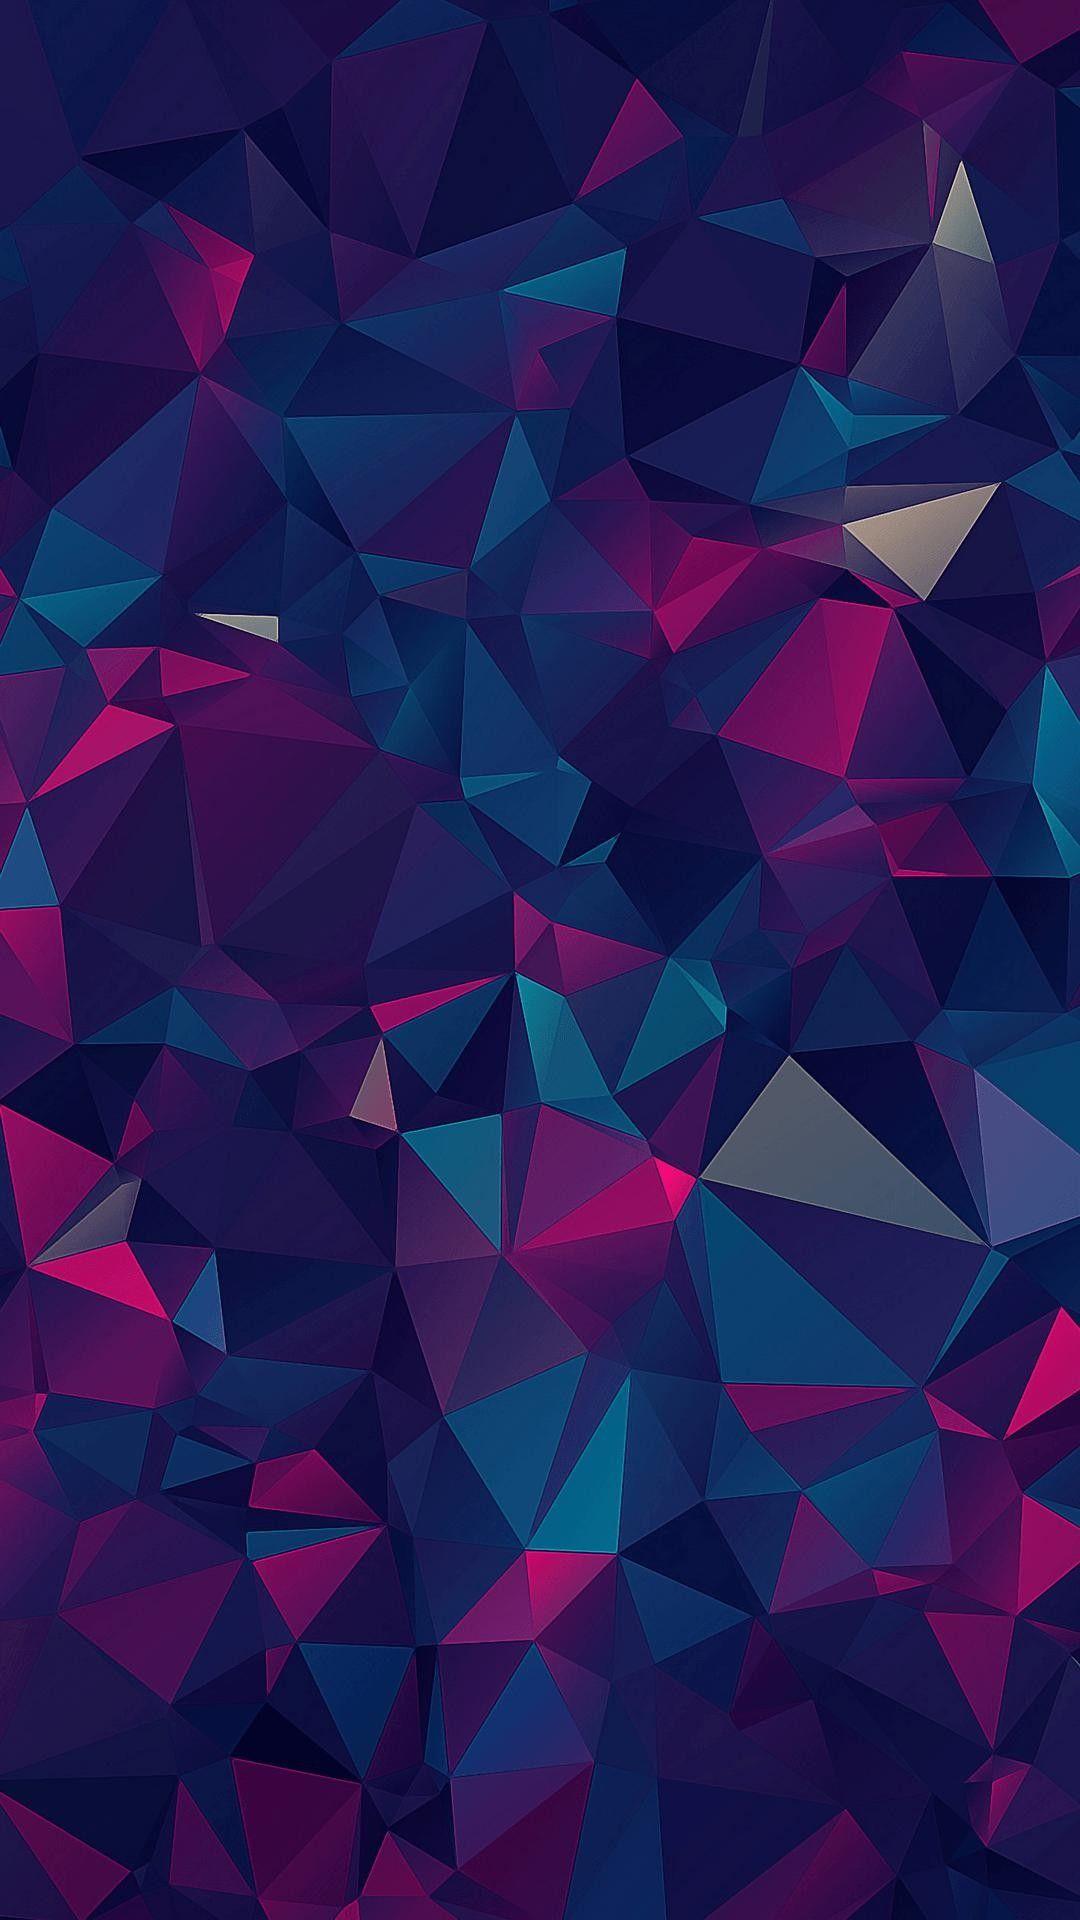 Geometry wallpaper or background Royalty Free Vector Image